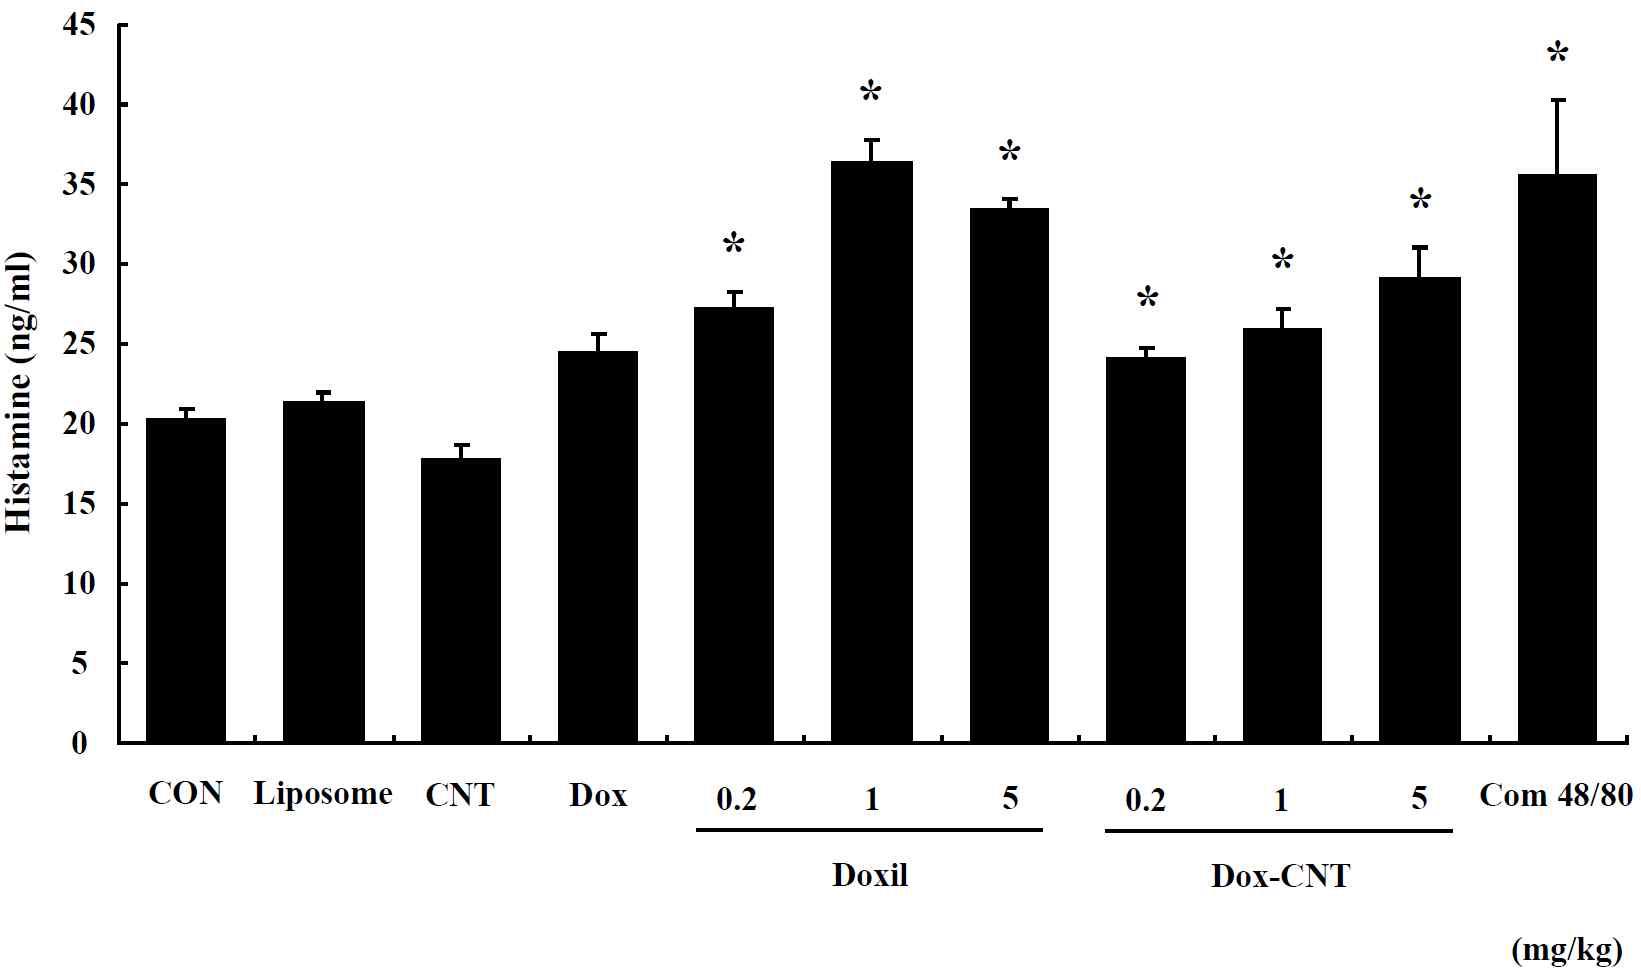 Histamine of serum in single exposed male mice. Mice were respectively administered by intravenous injection with liposome, CNT, Dox, Doxil (0.2, 1, 5 mg/kg) and Dox-CNT (0.2, 1, 5 mg/kg). The results are presented as mean ± SE (n = 10). * p < 0.05, significantly different from the control.